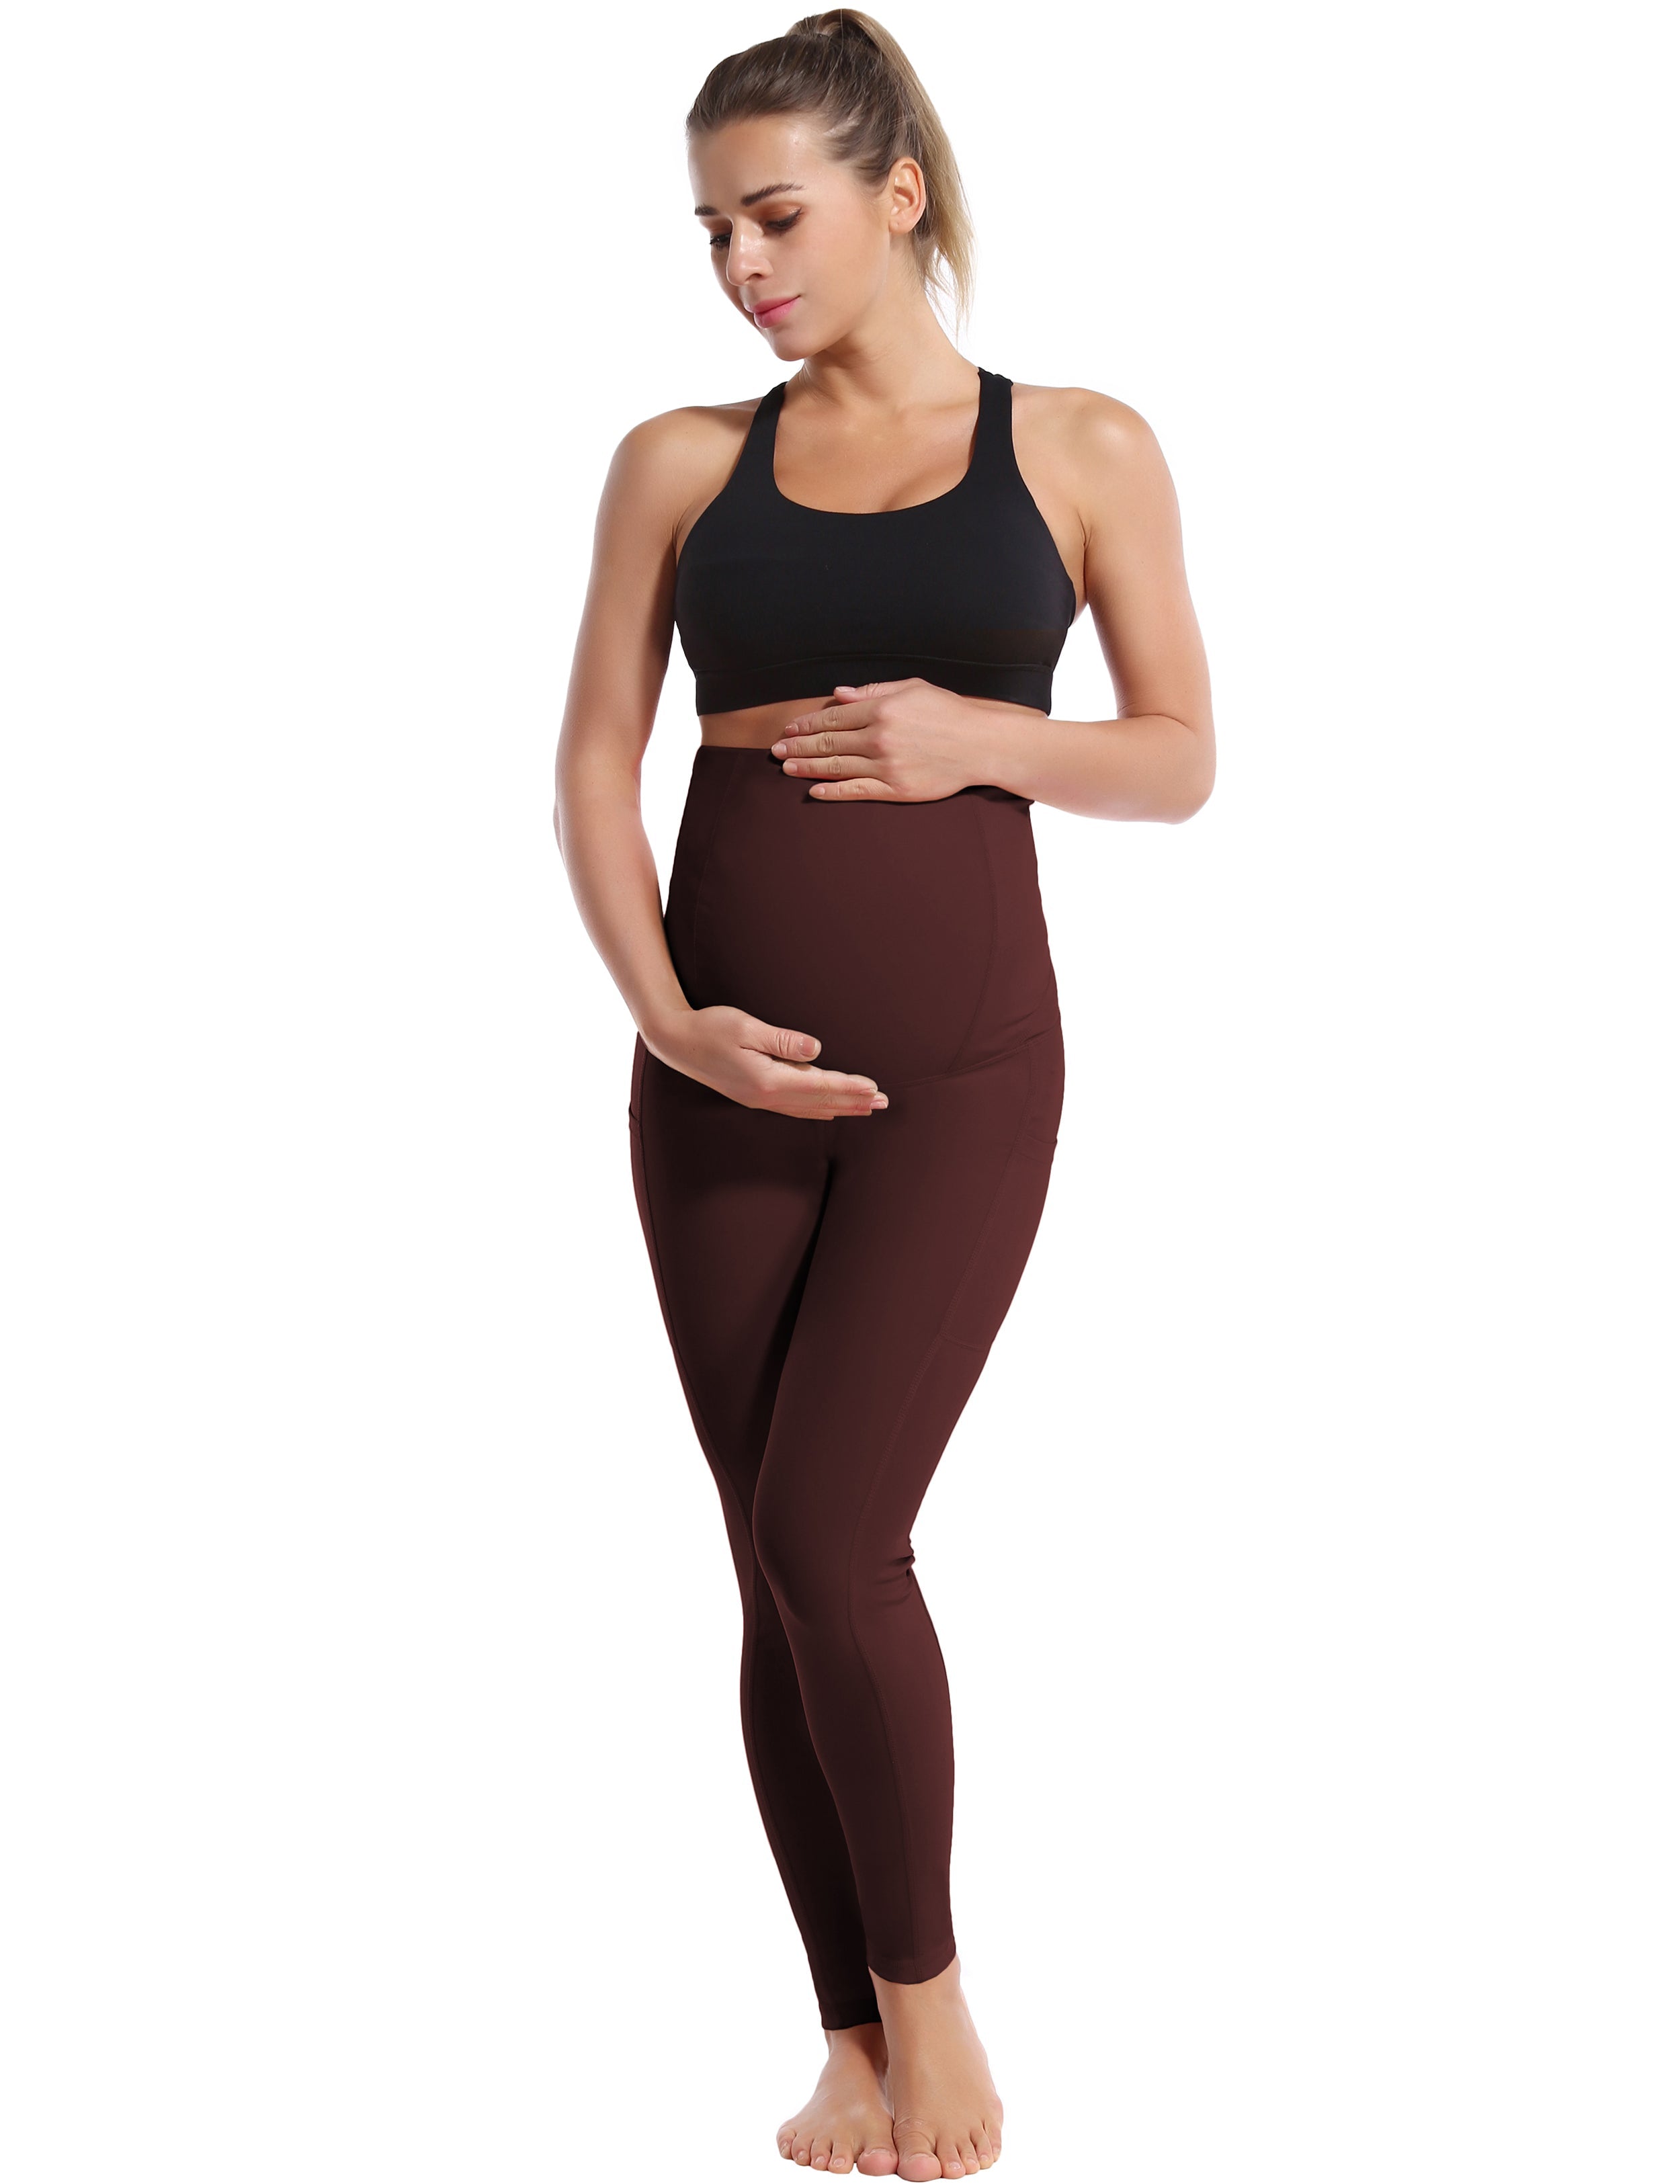 26" Side Pockets Maternity Biking Pants mahoganymaroon 87%Nylon/13%Spandex Softest-ever fabric High elasticity 4-way stretch Fabric doesn't attract lint easily No see-through Moisture-wicking Machine wash